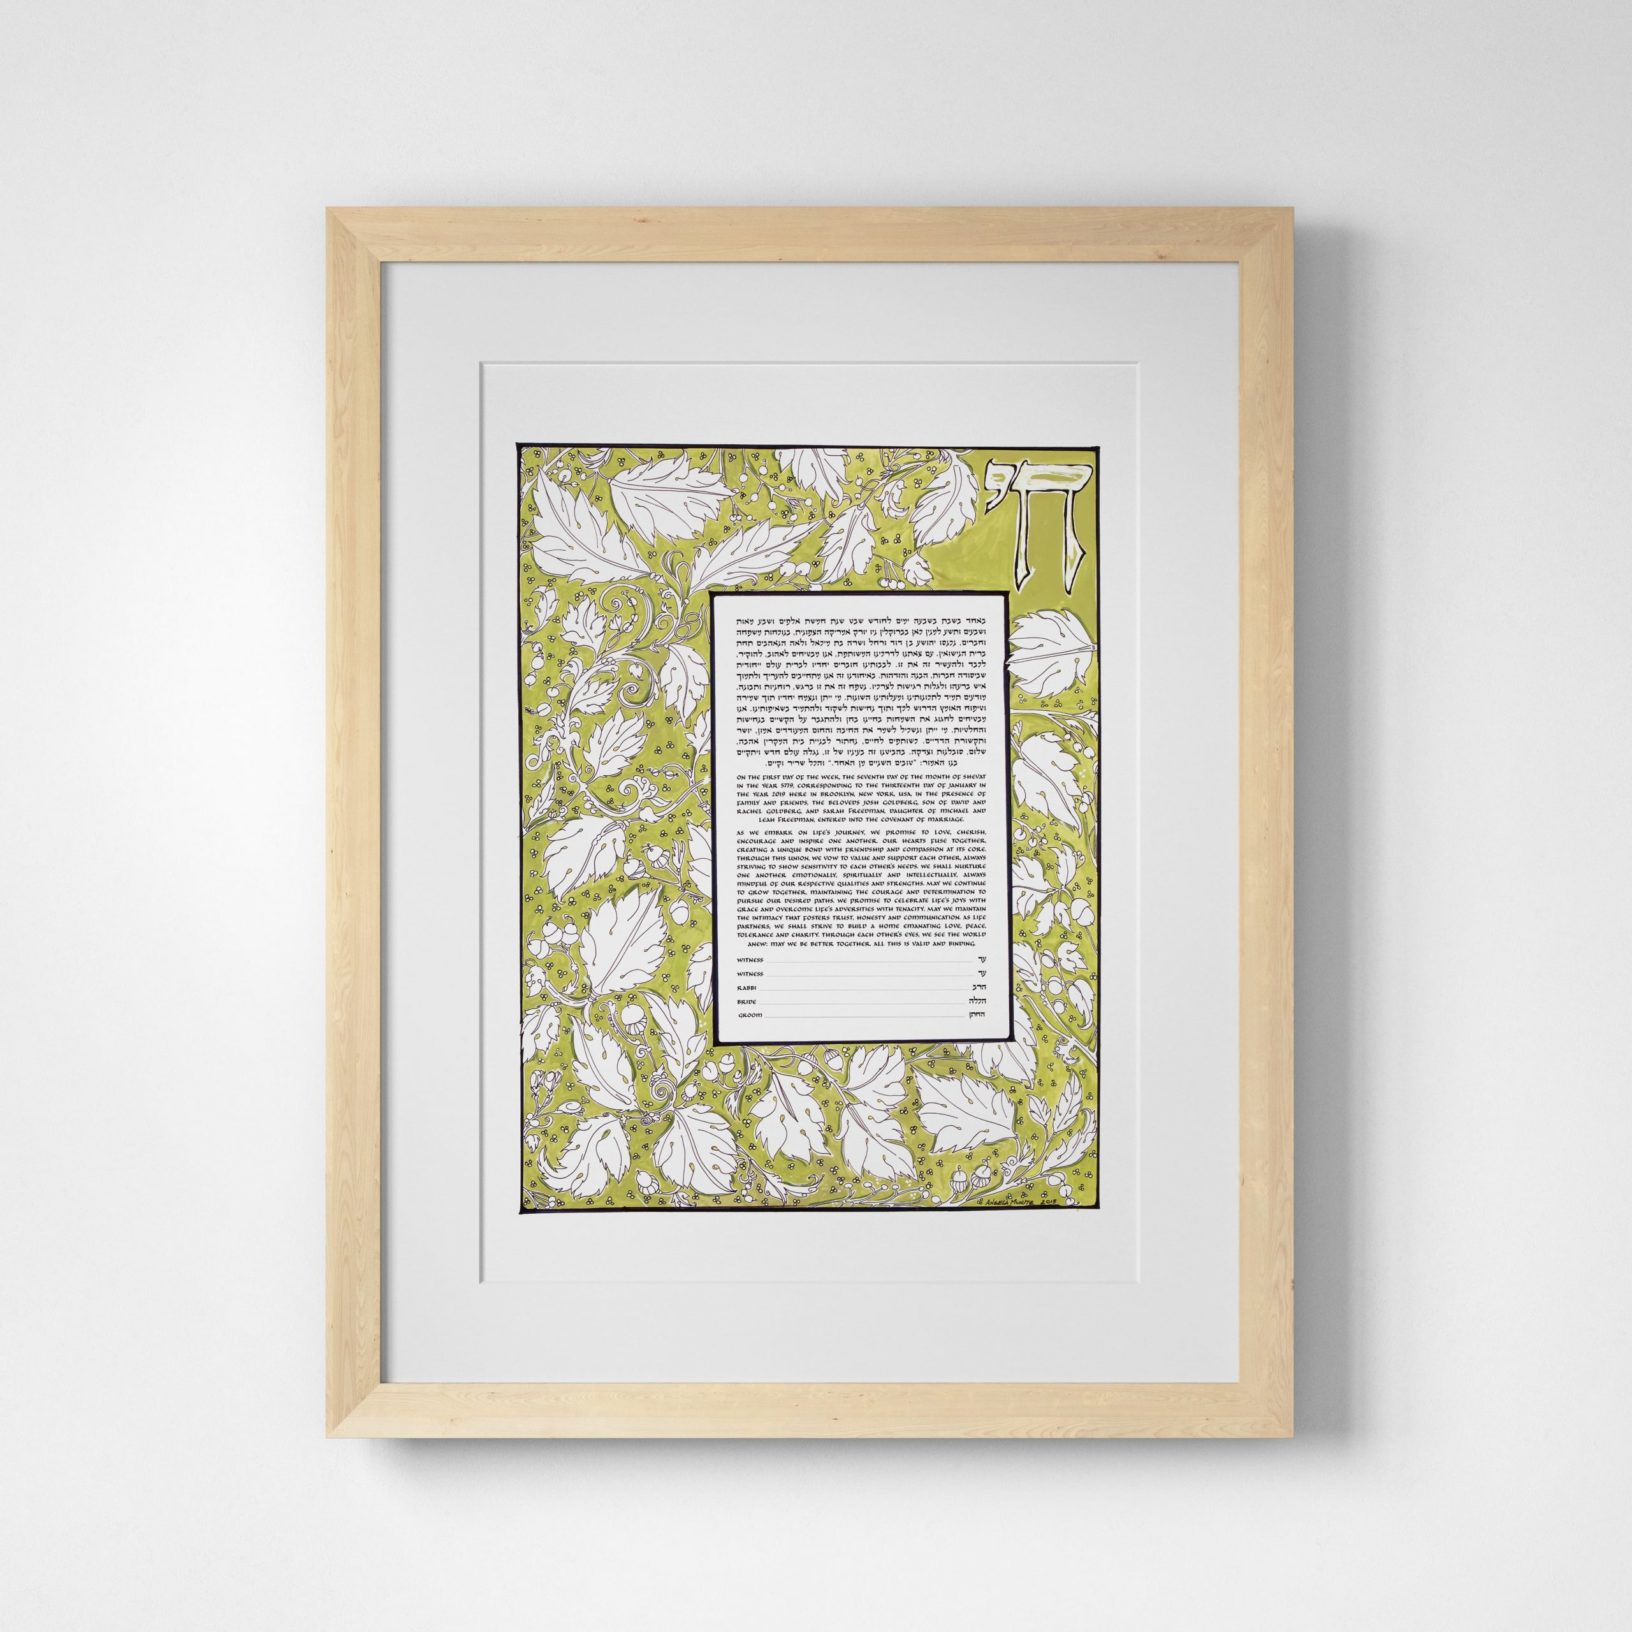 Verdant Green Ketubah Jewish Marriage Contracts by Angela Munitz